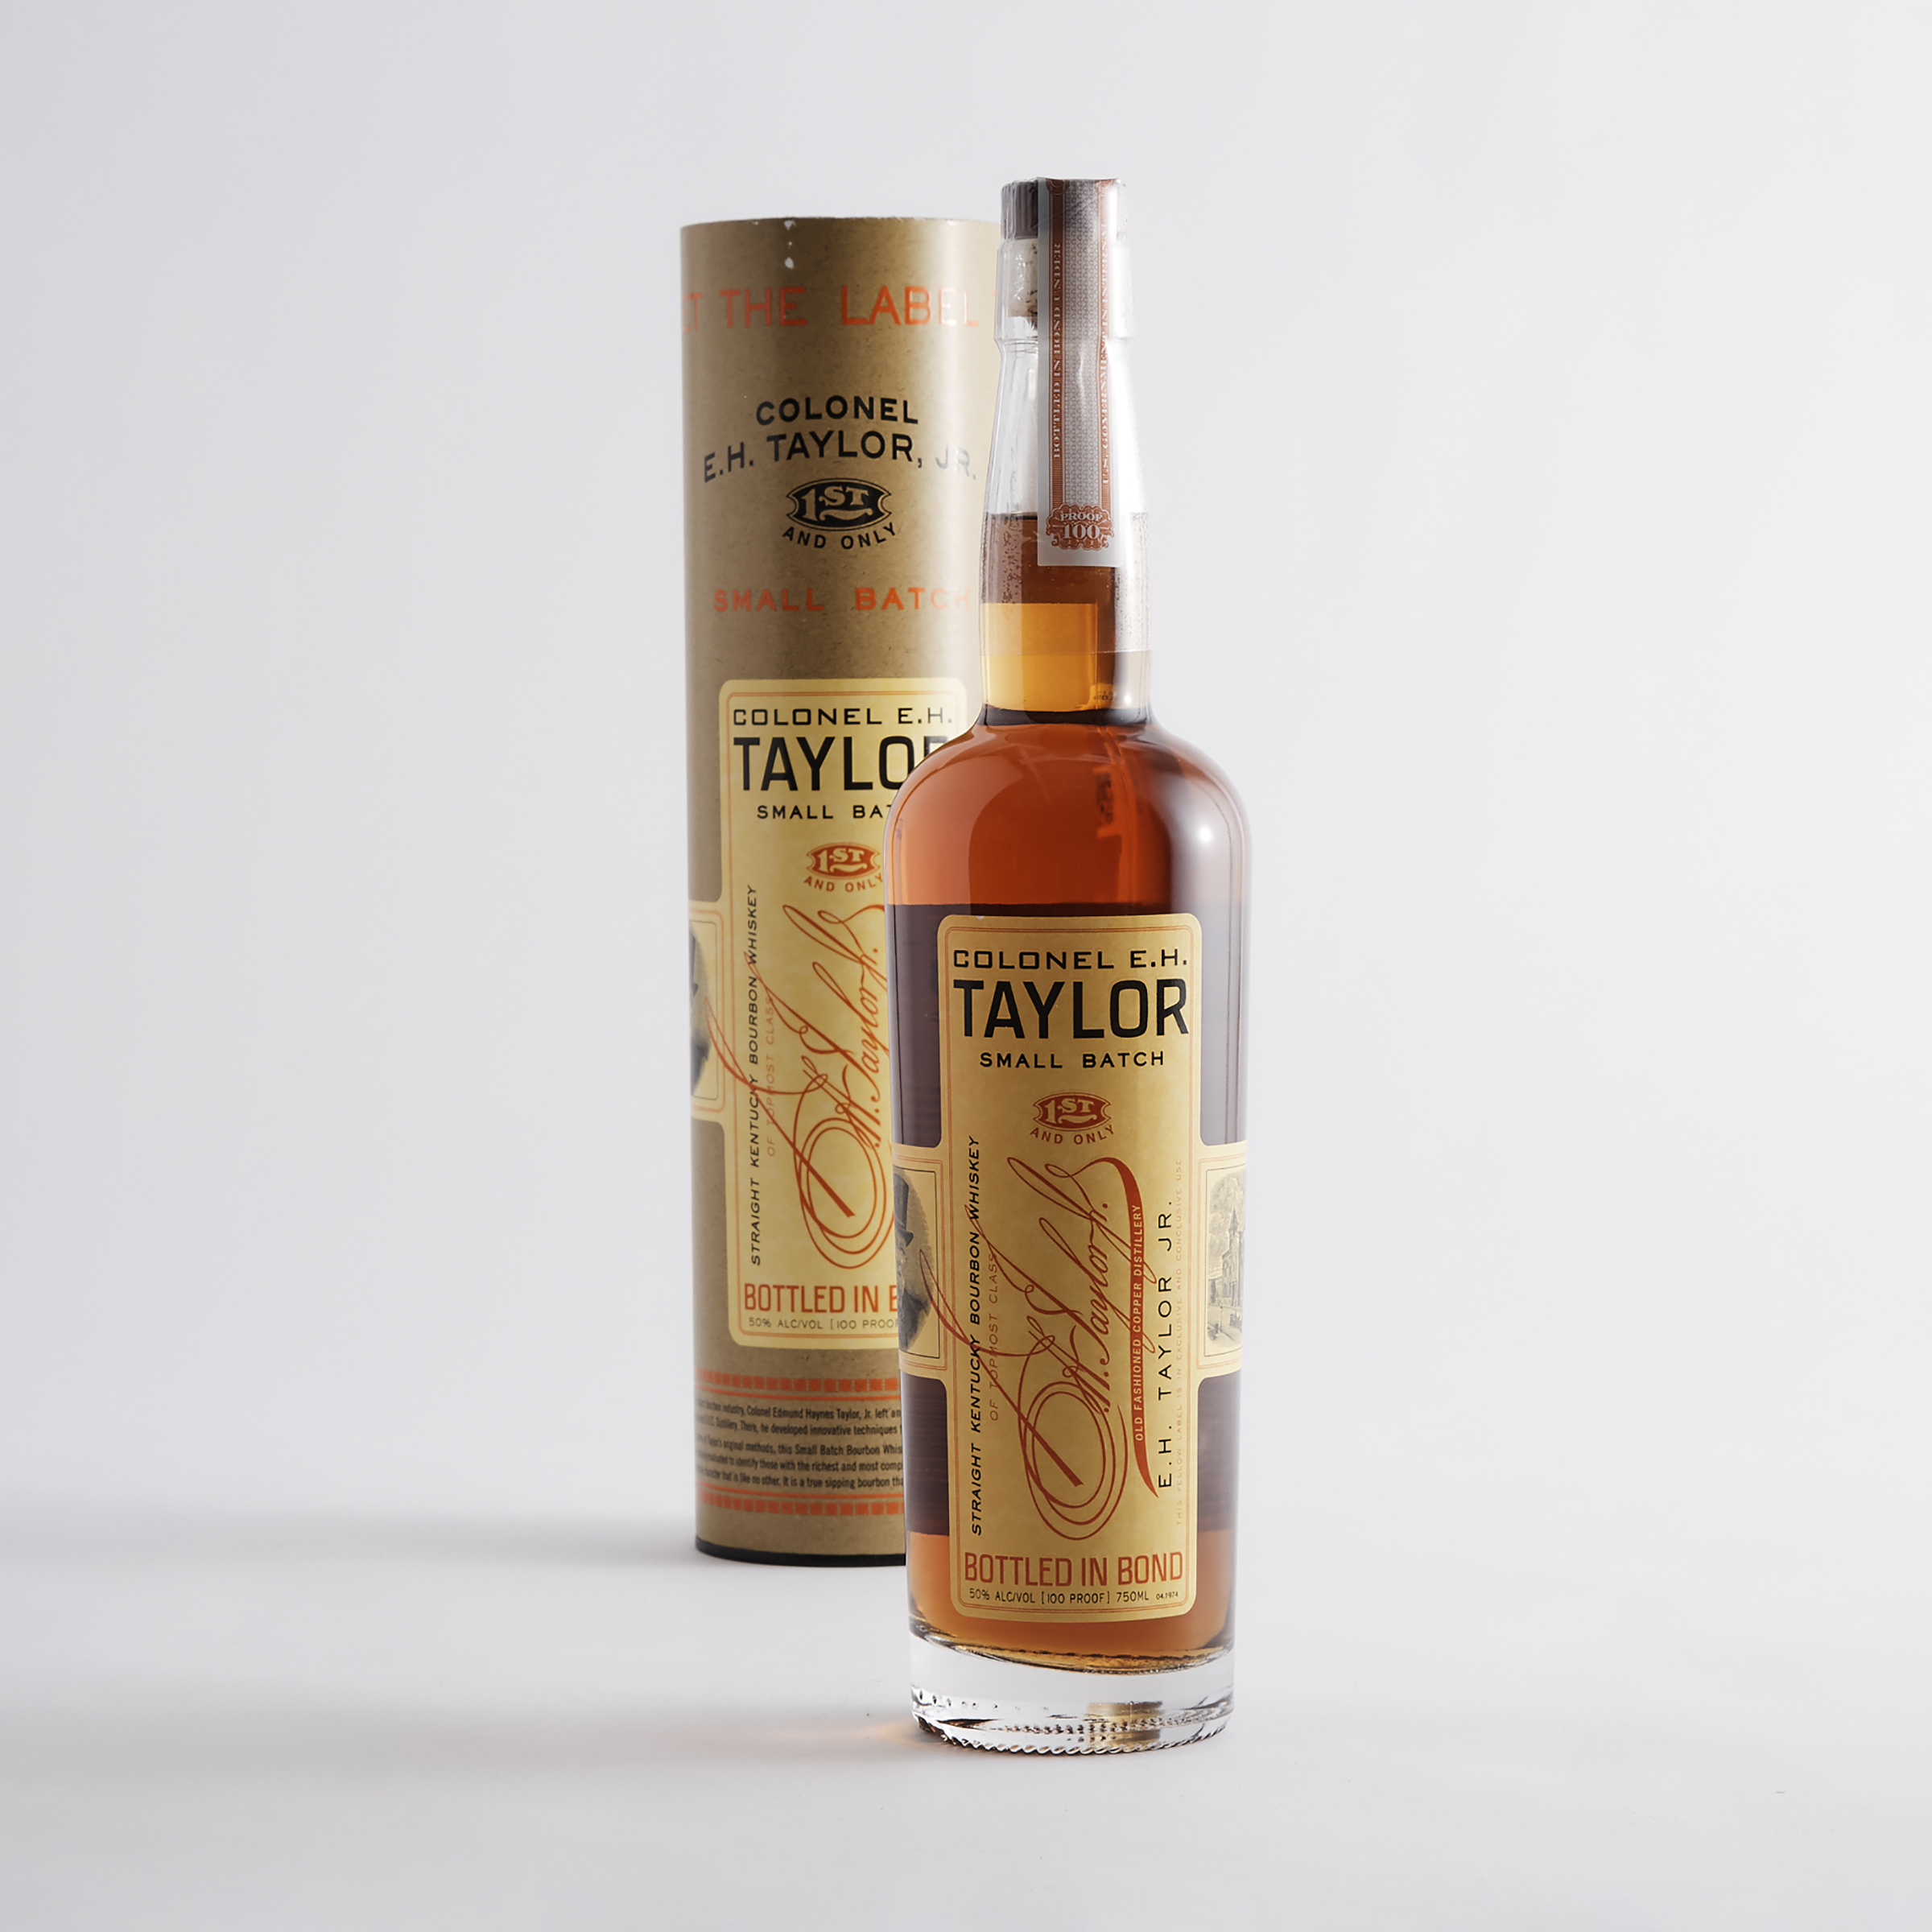 COLONEL E.H. TAYLOR JR. SMALL BATCH STRAIGHT KENTUCKY BOURBON WHISKEY (ONE 750 ML)